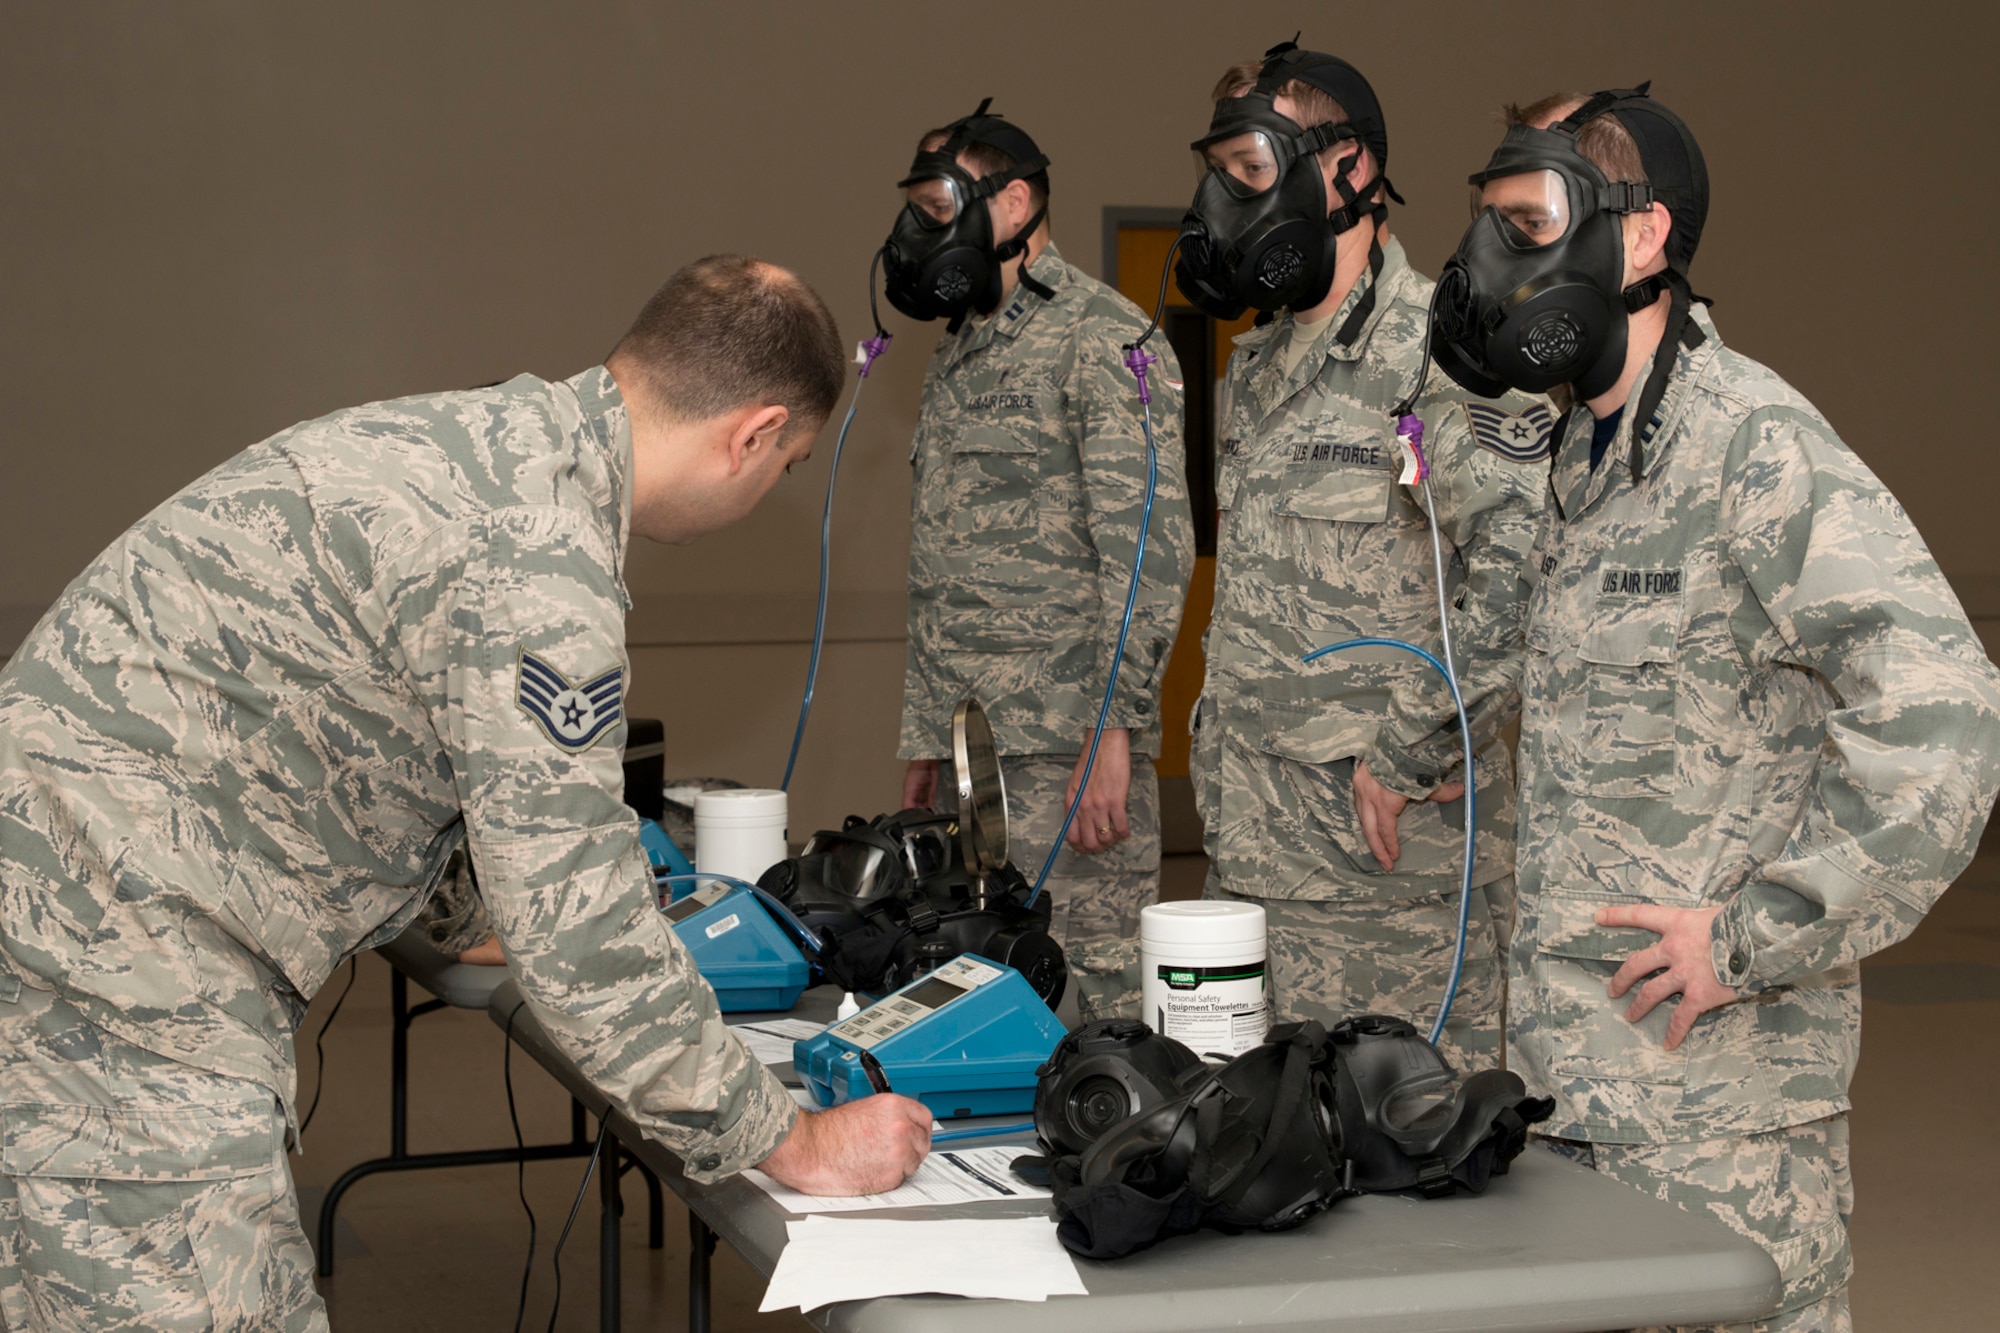 U.S. Air Force Staff Sgt. Kyle Love, 19th Medical Group bioenvironmental technician, conducts gas mask fit tests on Reserve Airmen at Little Rock Air Force Base, Ark., Mar. 13, 2016. The tests, which are mandatory requirements, ensure which size mask will keep each individual safe during situations involving airborne pollutants and toxic gases. (U.S. Air Force photo by Master Sgt. Jeff Walston/Released)